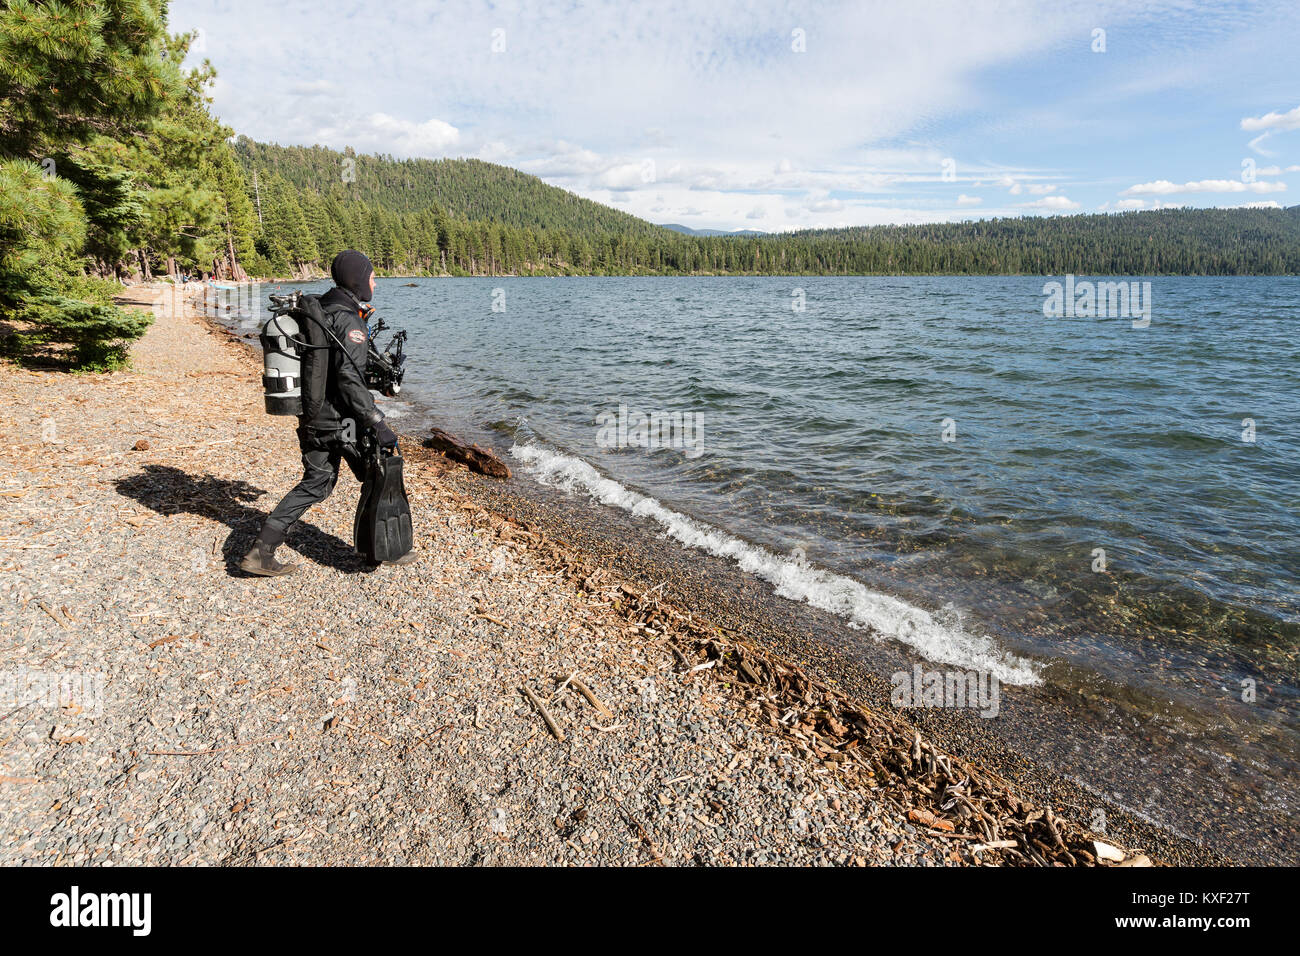 A scuba diver prepares to enter Fallen Leaf Lake in the Sierra Nevada Mountains for altitude diving. Stock Photo